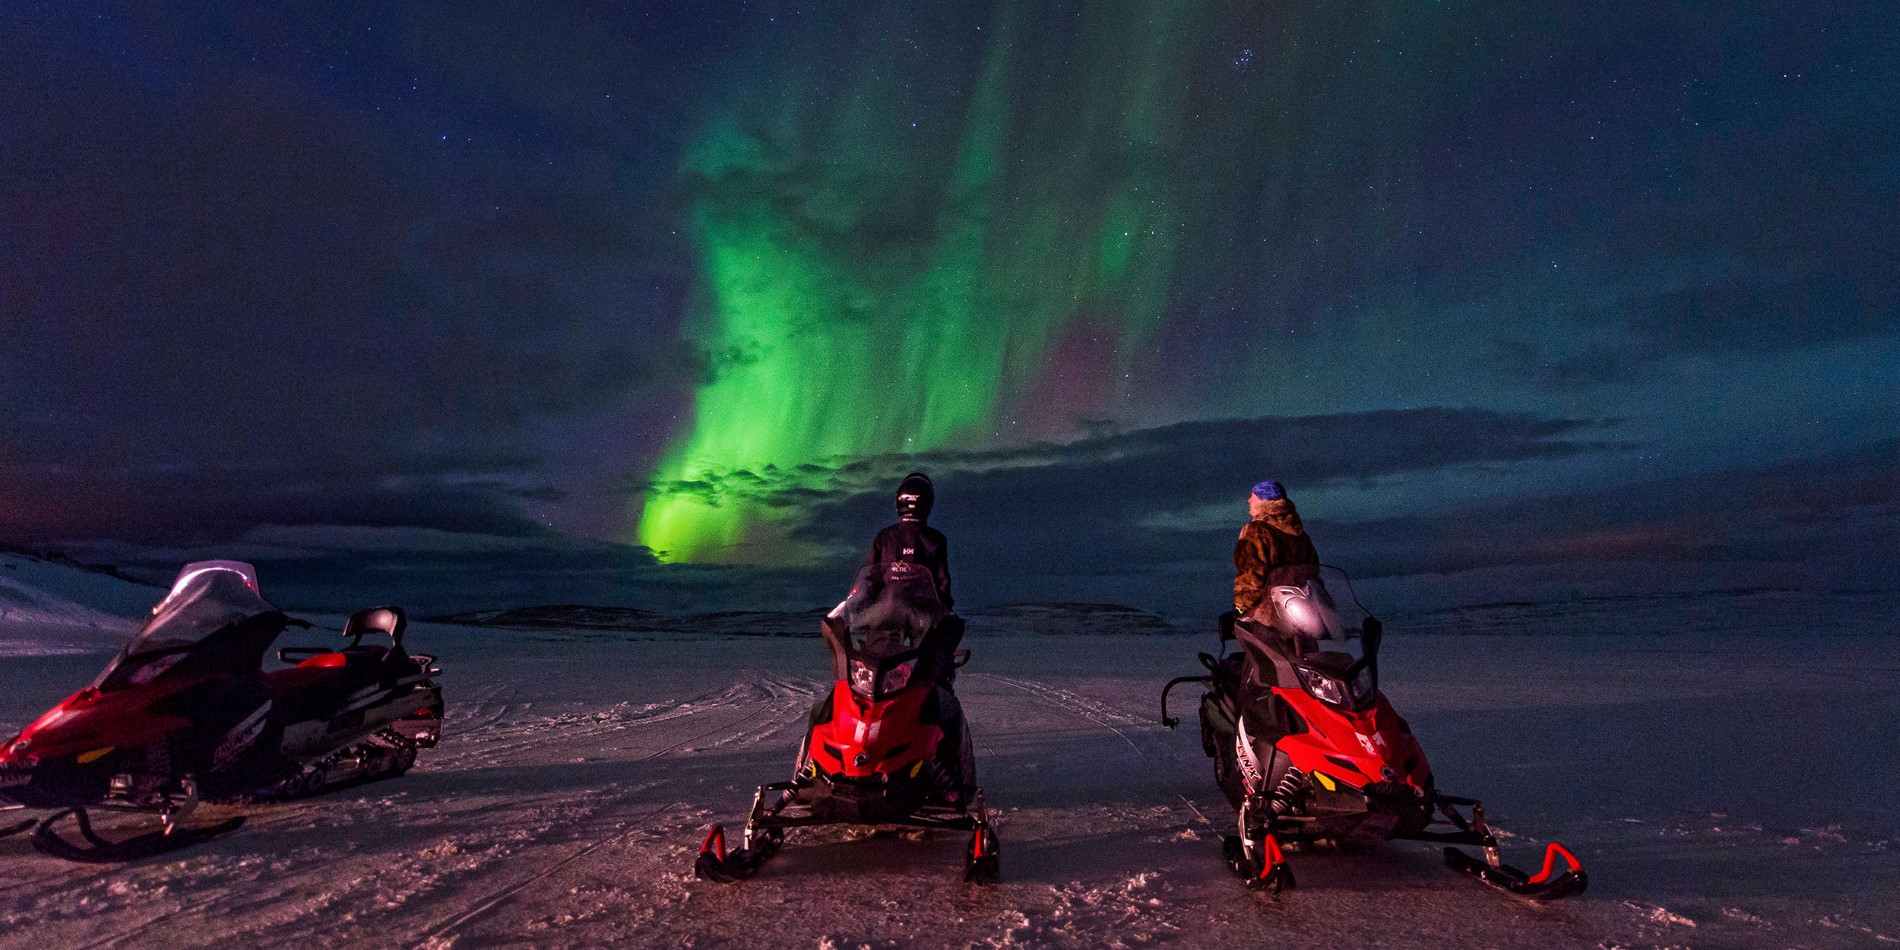 Hurtigruten is the best way to experience the Northern Lights - away from artificial lights